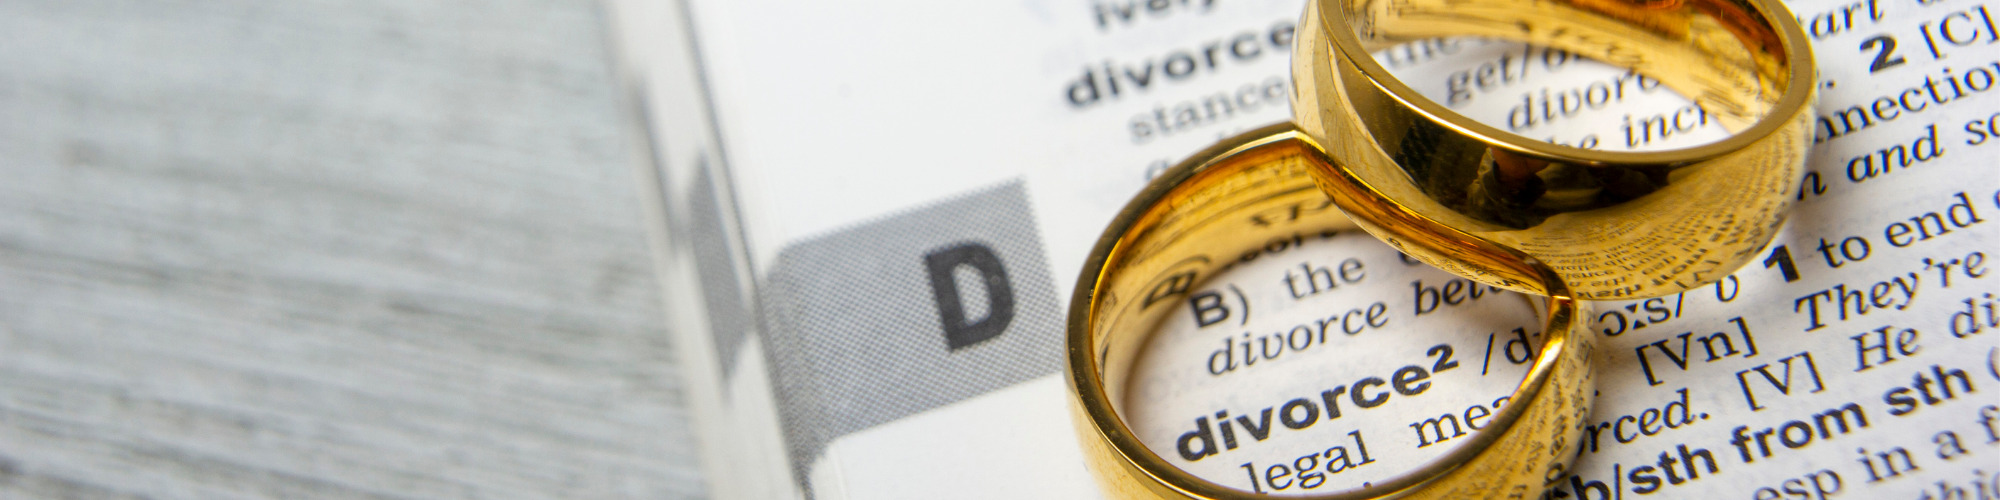 The Death of a Spouse During Divorce Proceedings - The Key Issues 